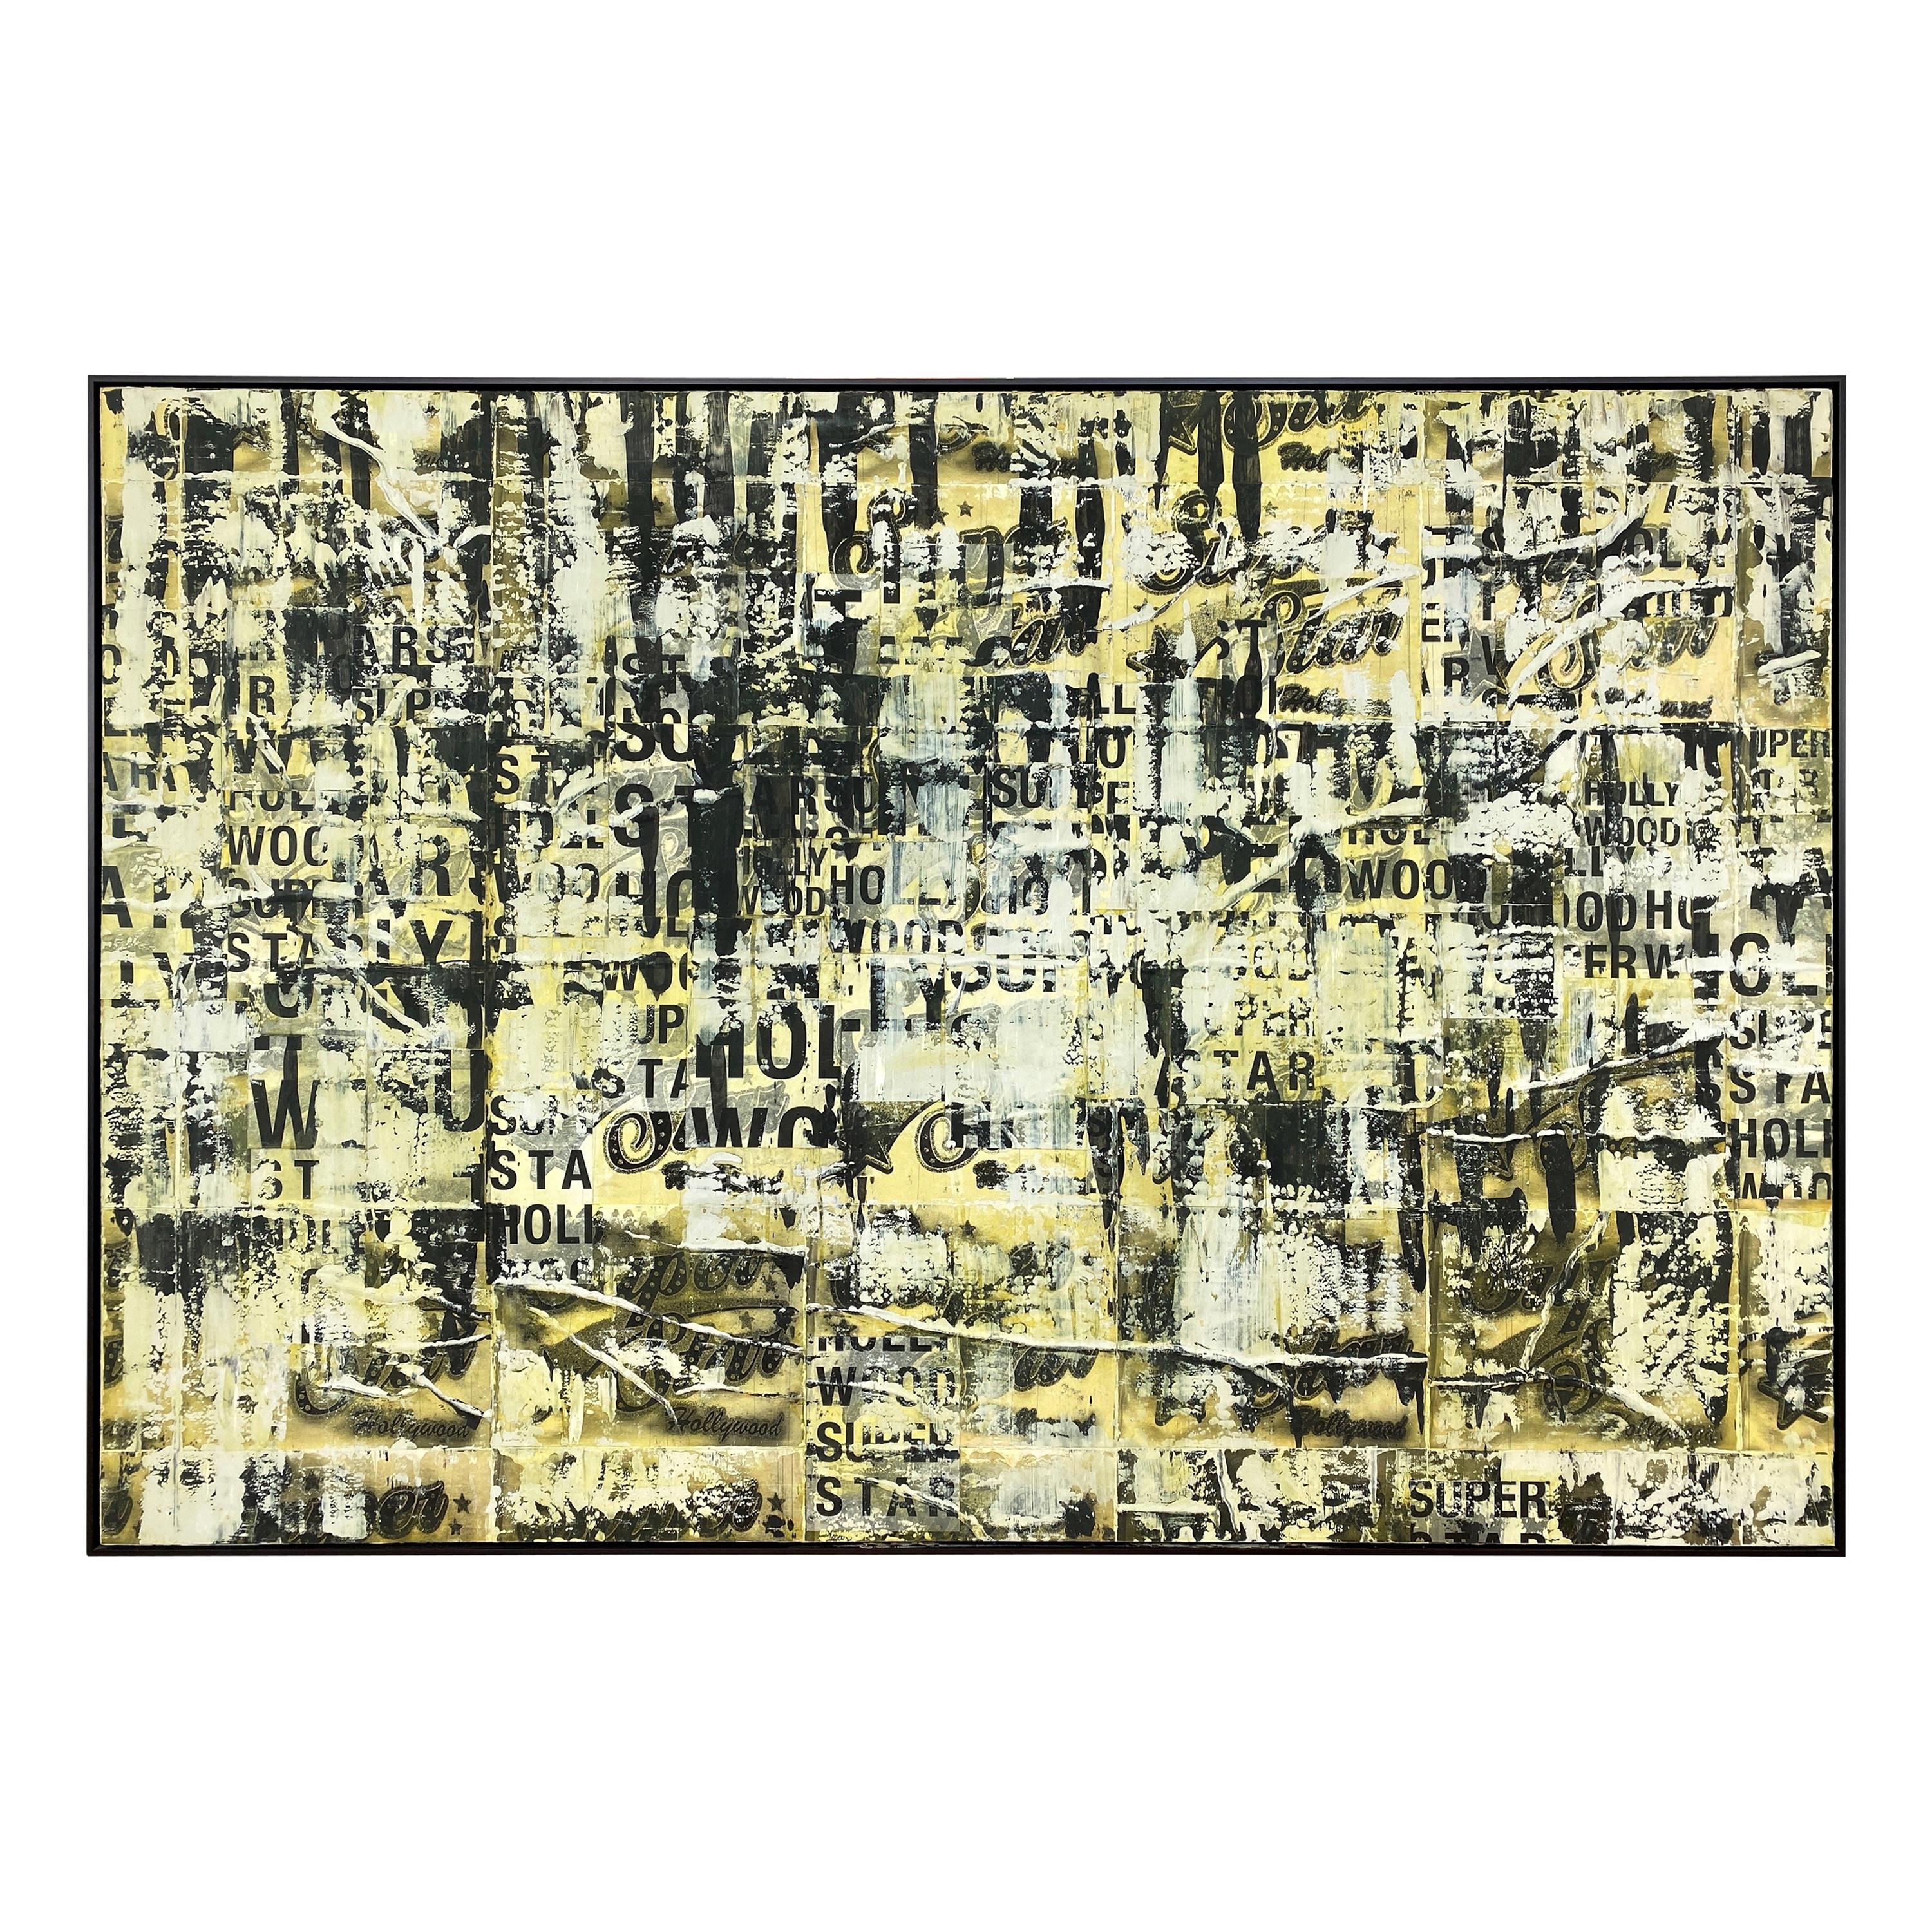 An extra large 2007 mixed-media abstract expressionist oil painting on canvas titled “Super Star Hollywood” by Los Angeles-based contemporary artist Chase Langford.

Displaying an aesthetic and technique rarely seen in his work, rendered with